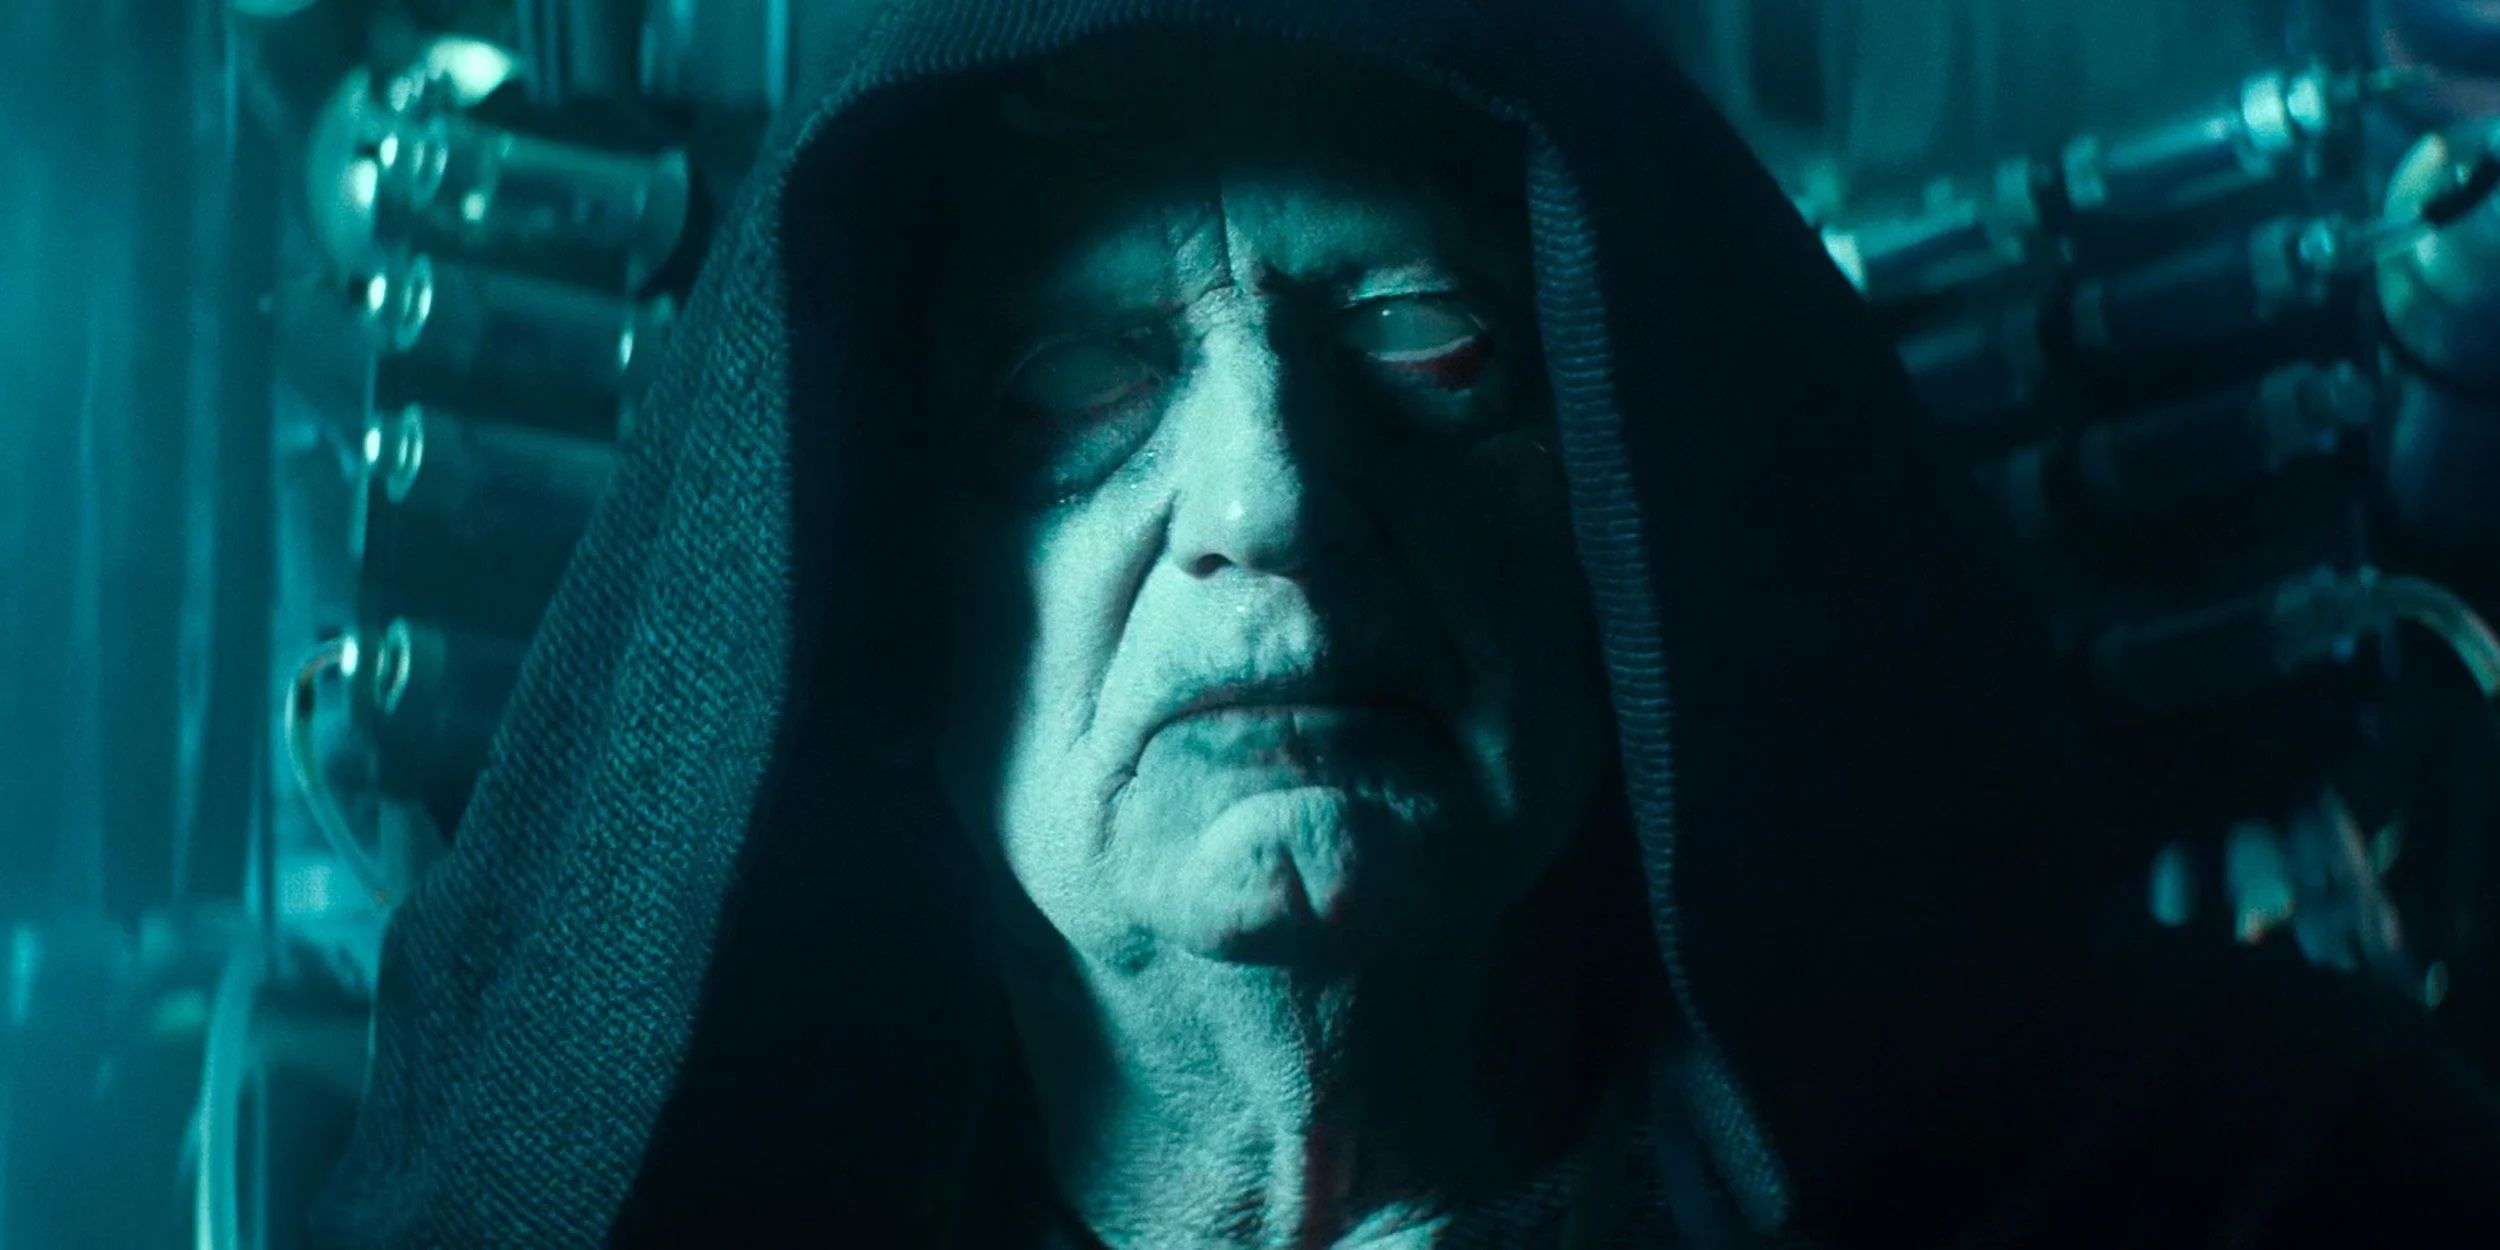 Emperor Palpatine in his Exegol throne room in Star Wars The Rise of Skywalker